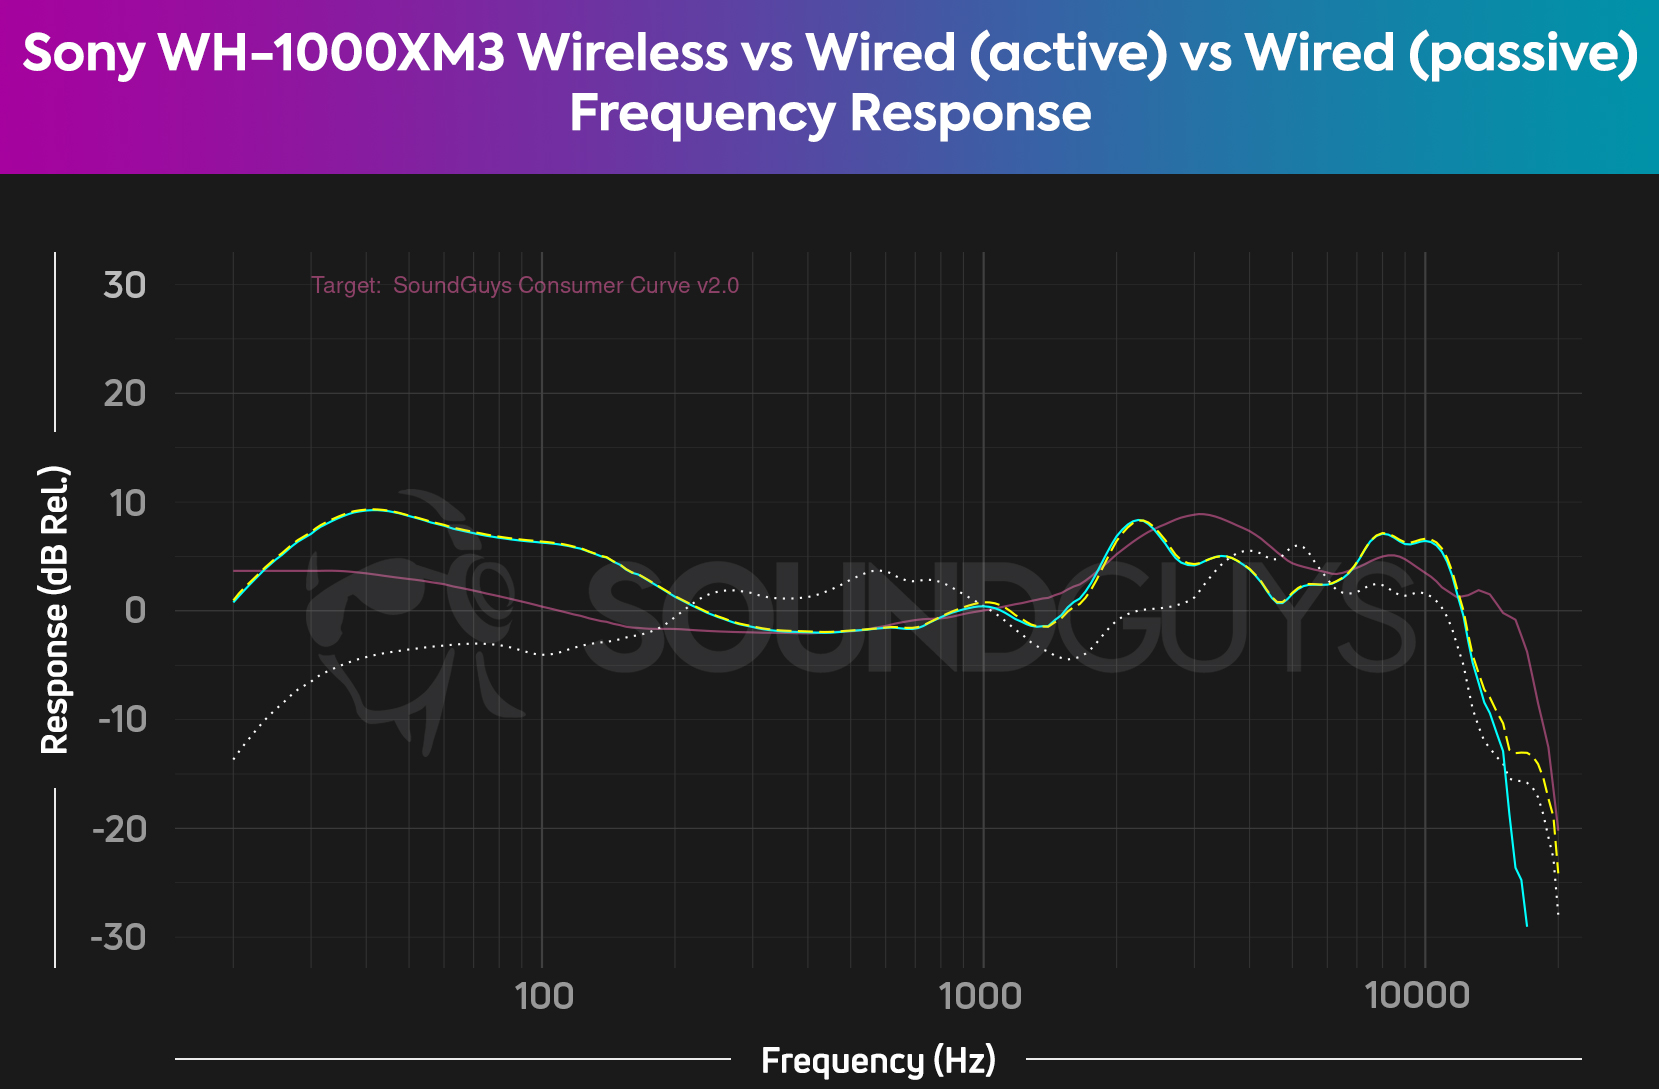 A chart compares the frequency responses of the Sony WH-1000XM3 in wireless mode (cyan) against the headset in wired, active mode (yellow dash) and the headset in wired, passive mode (white dot), against the SoundGuys Consumer Curve V2 (pink), which reveals a slightly different sound depending on how you listen.